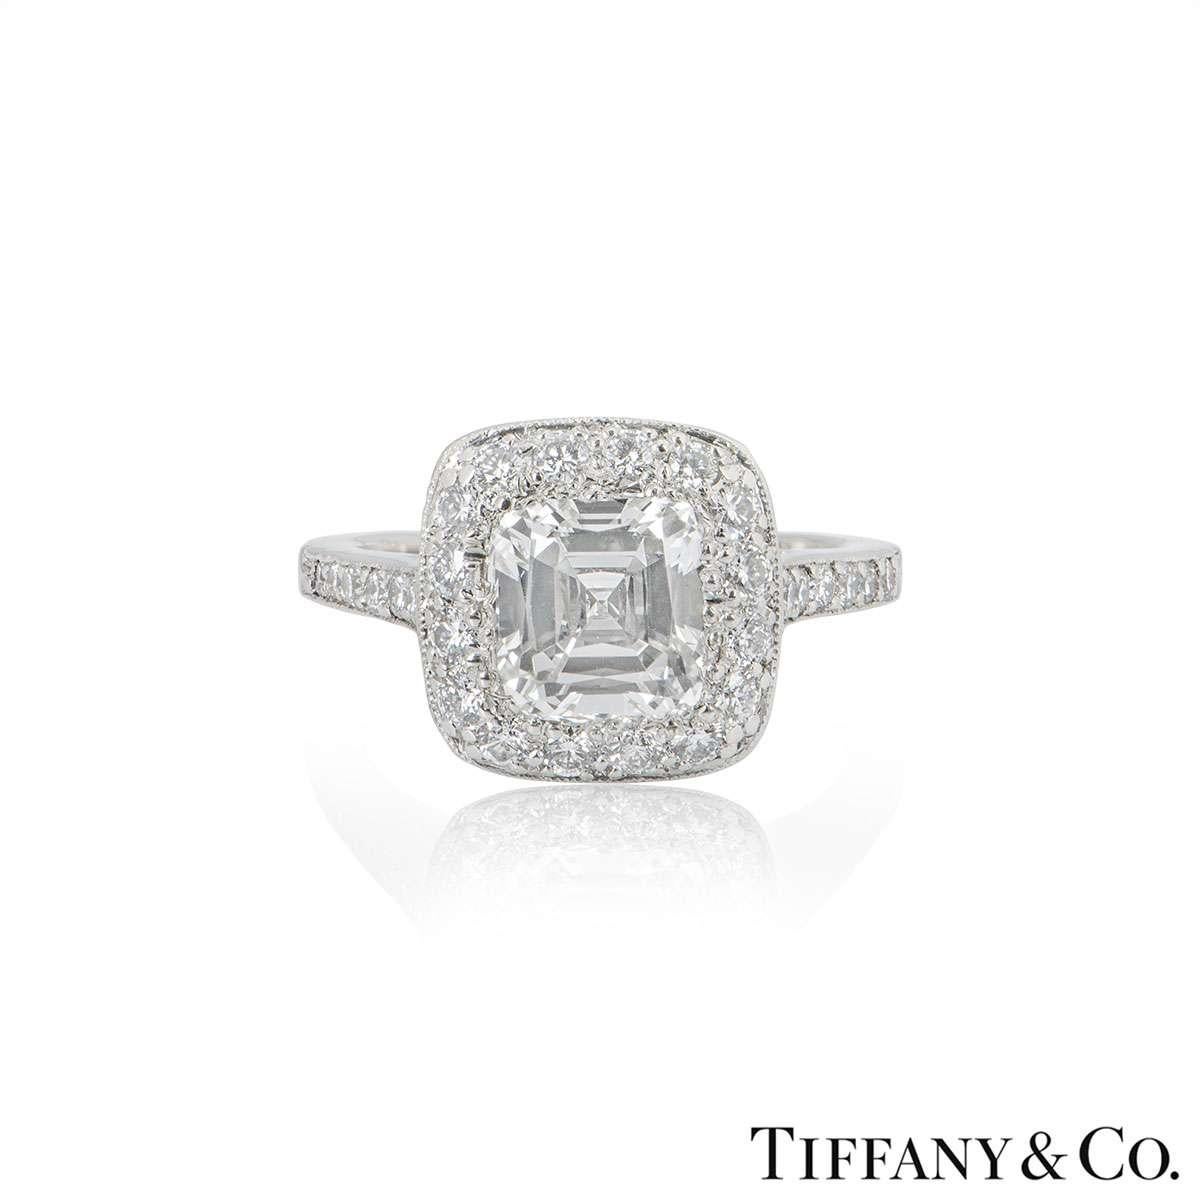 A stunning platinum diamond ring from the Legacy collection by Tiffany & Co. The ring is set to the centre with a 1.54ct modified cushion cut diamond, H colour and VS2 clarity. The diamond is complemented by diamond set shoulders and halo totalling